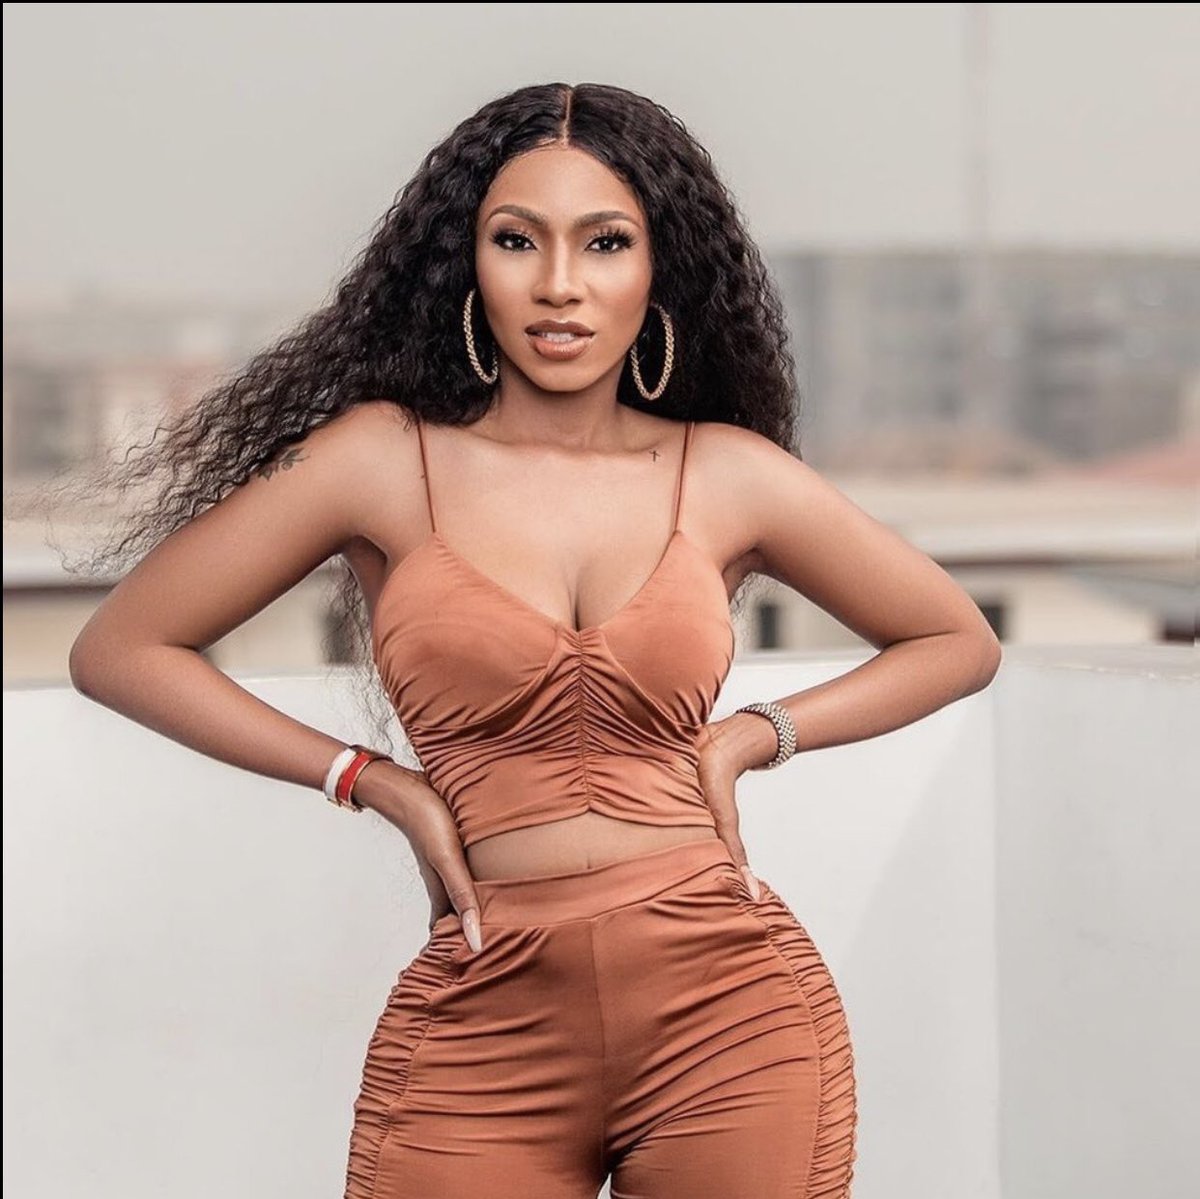 Season 4 (2019) – Mercy EkeThe fourth season of Big Brother Naija launched on 30 June 2019 and was dubbed “Pepper Dem.” Unlike previous seasons, the show held in Nigera and aired for 99 days. The viewers watched 26 contestants vye for the N60 million worth prizes.